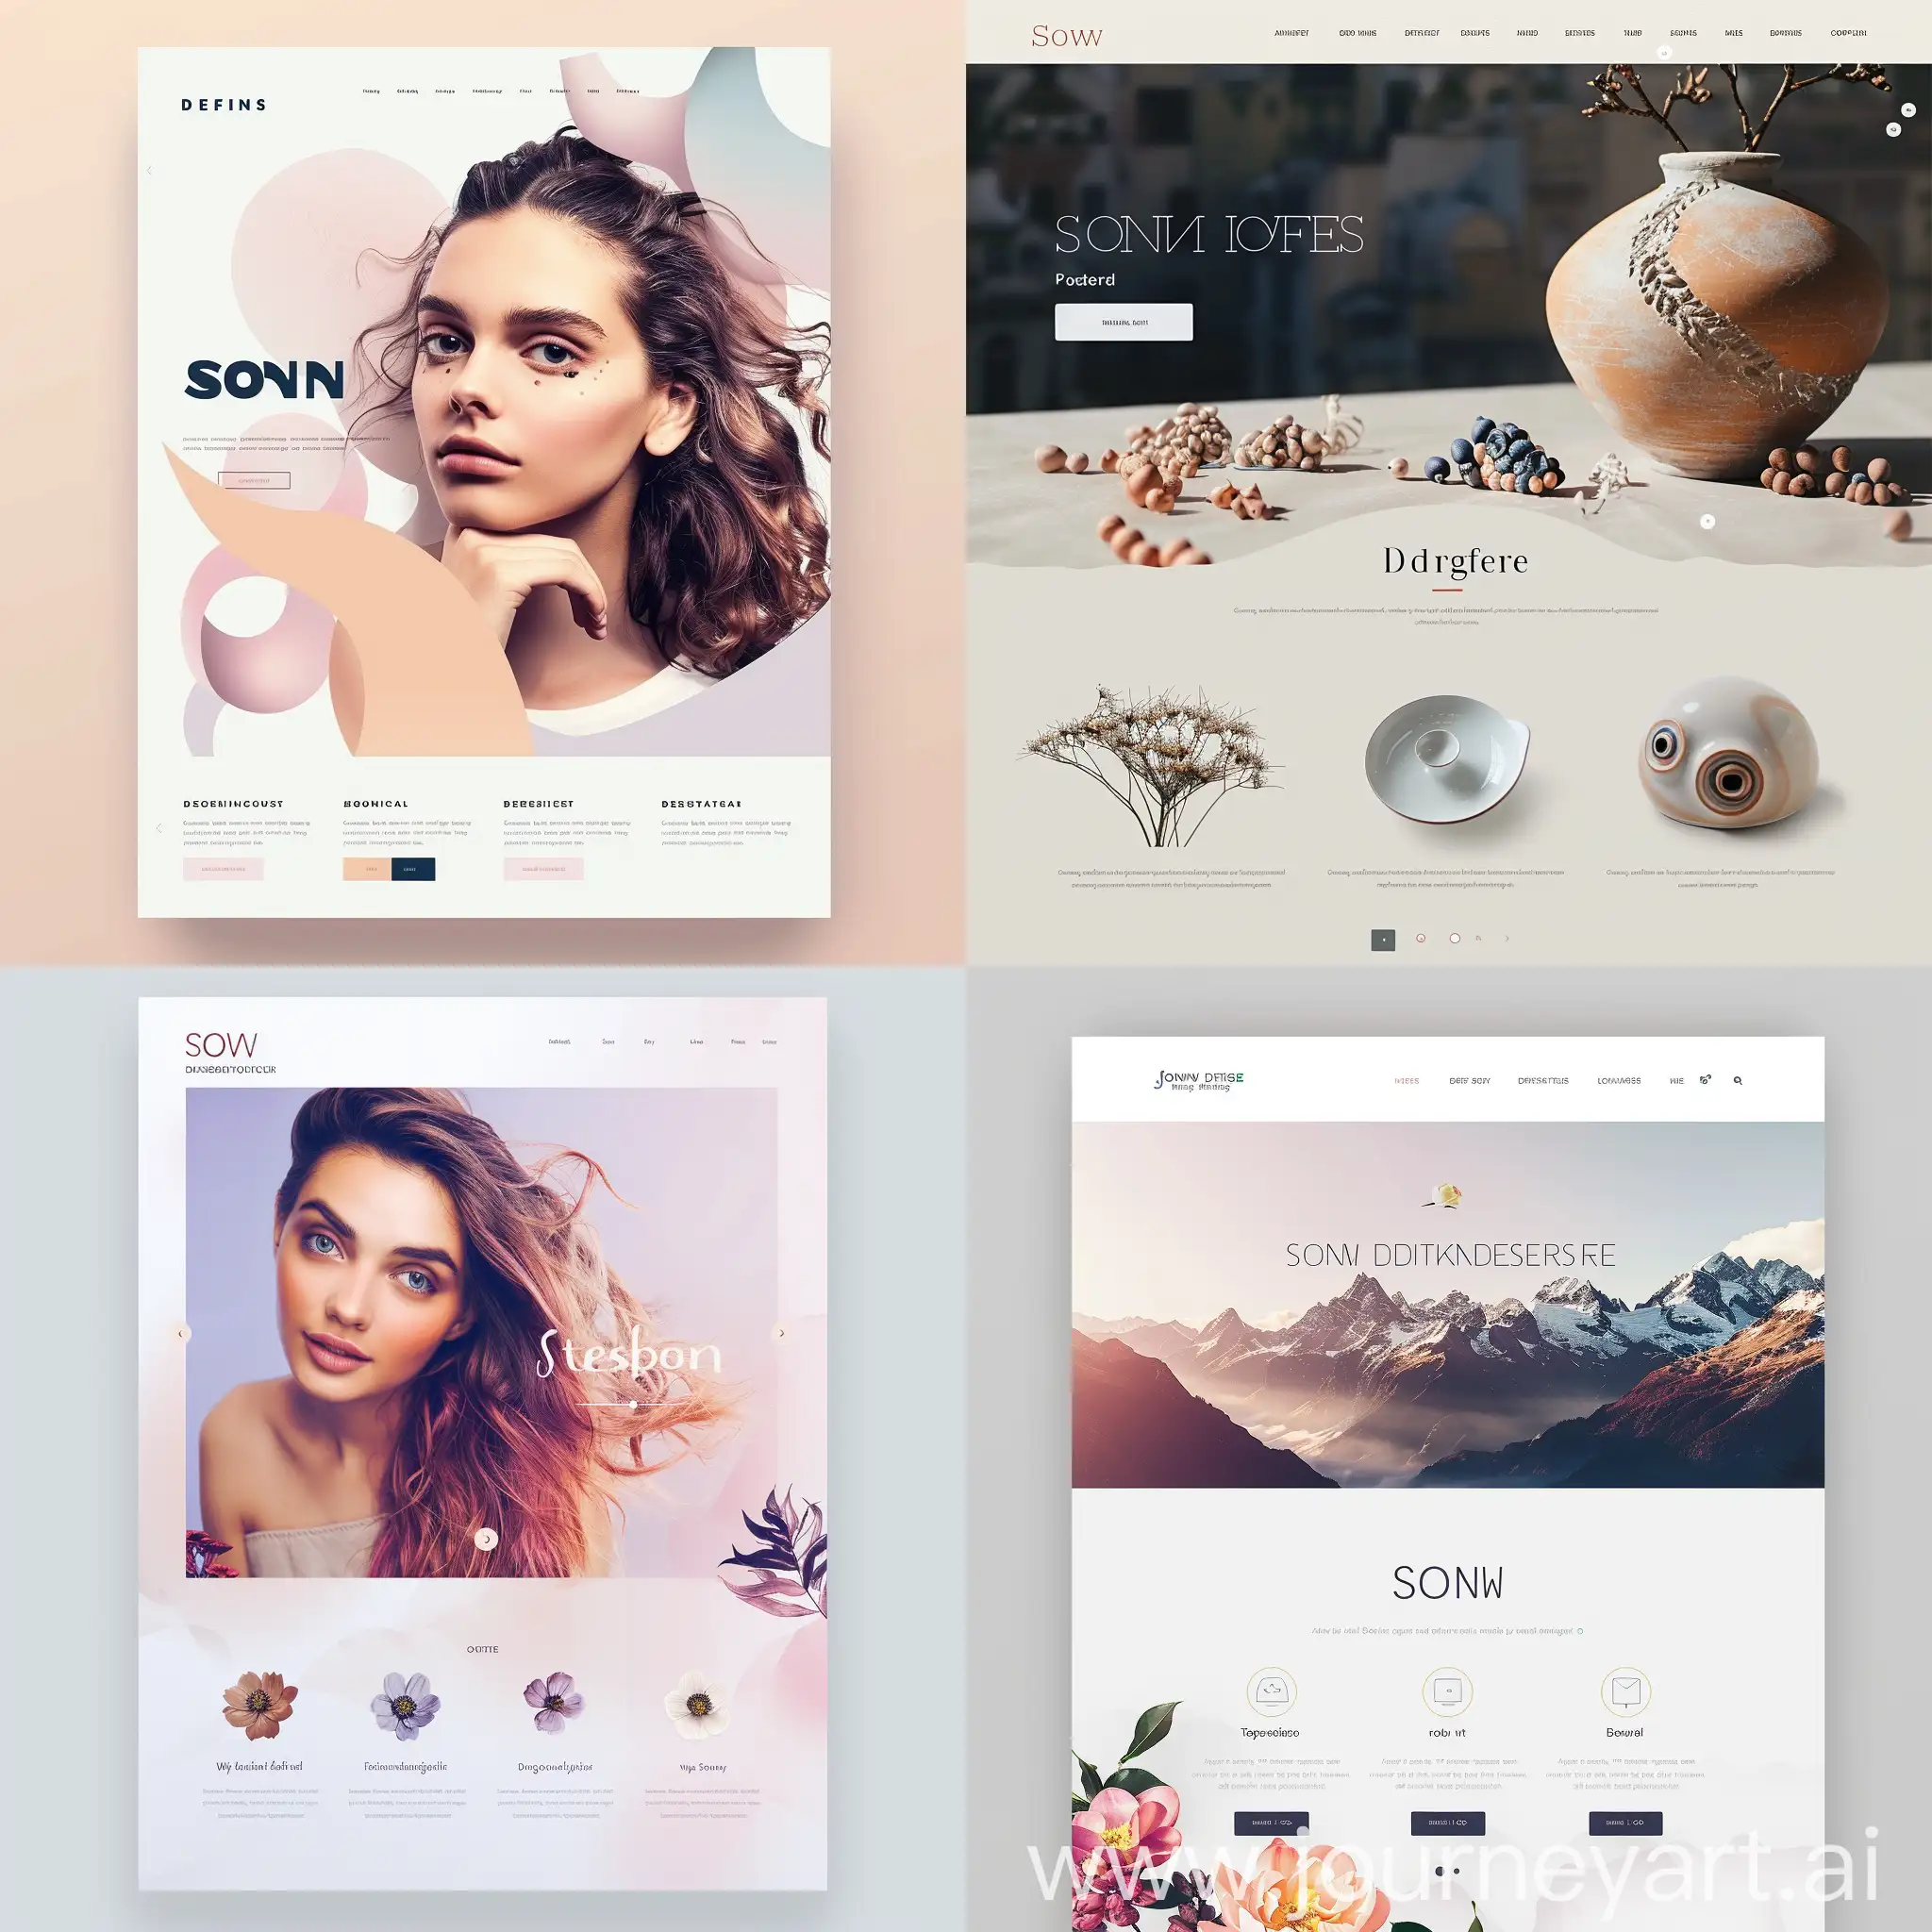 create for me a UI Soon page for a graphic designer portfolio website, make it modern and simple